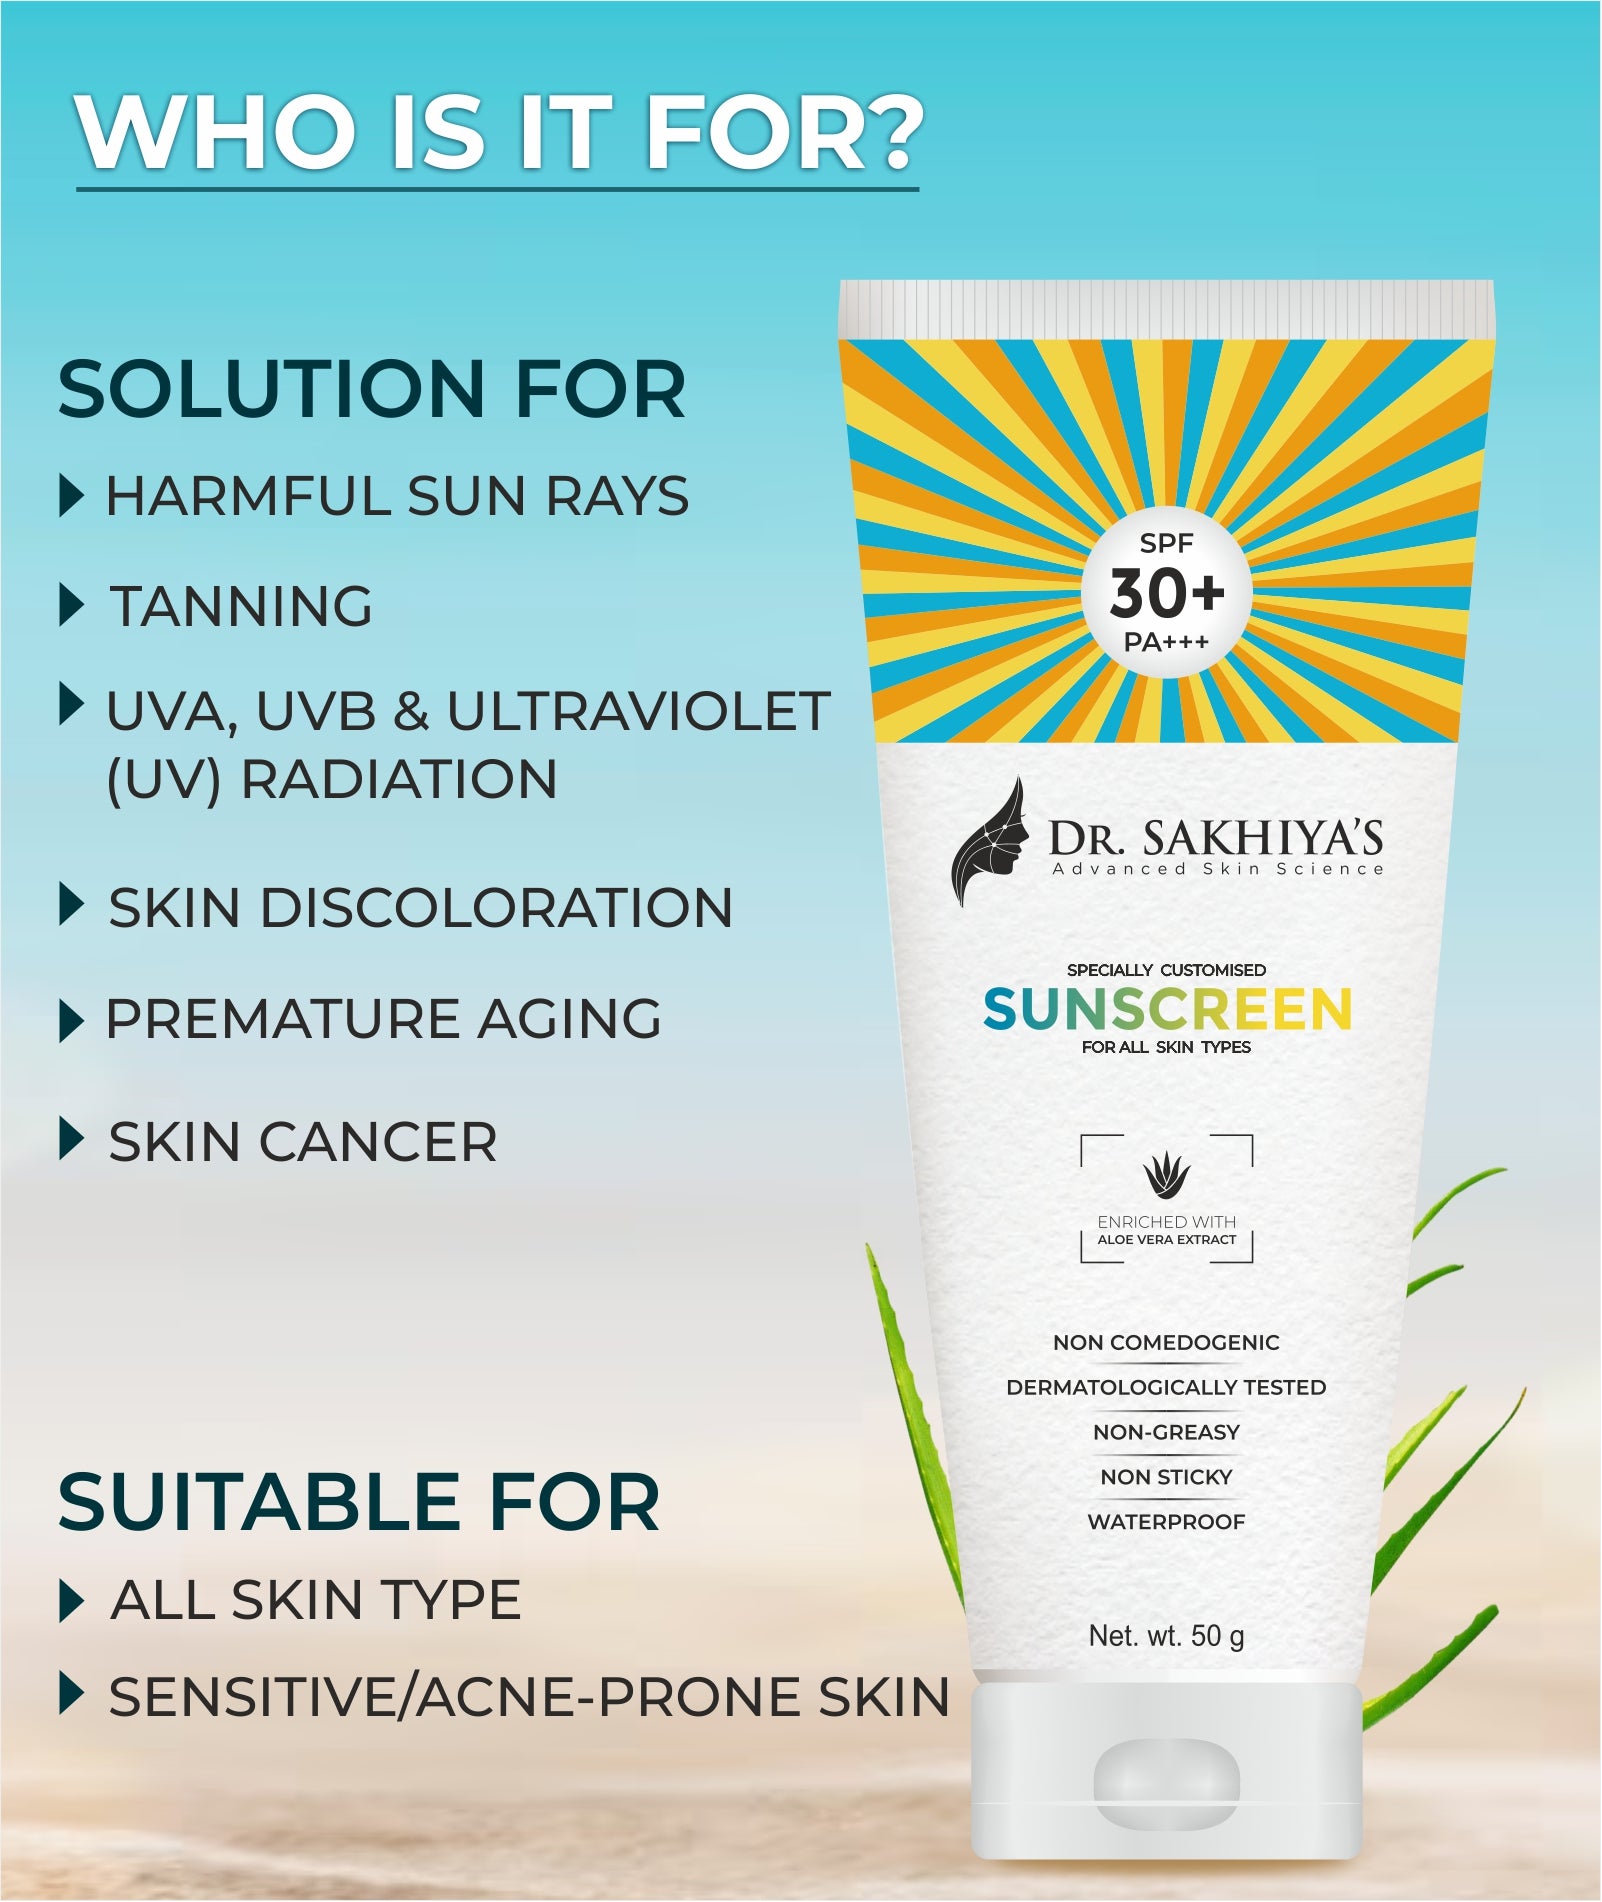 Full Protection From Harmful Sun Rays And Suitable For All Types Of Skin